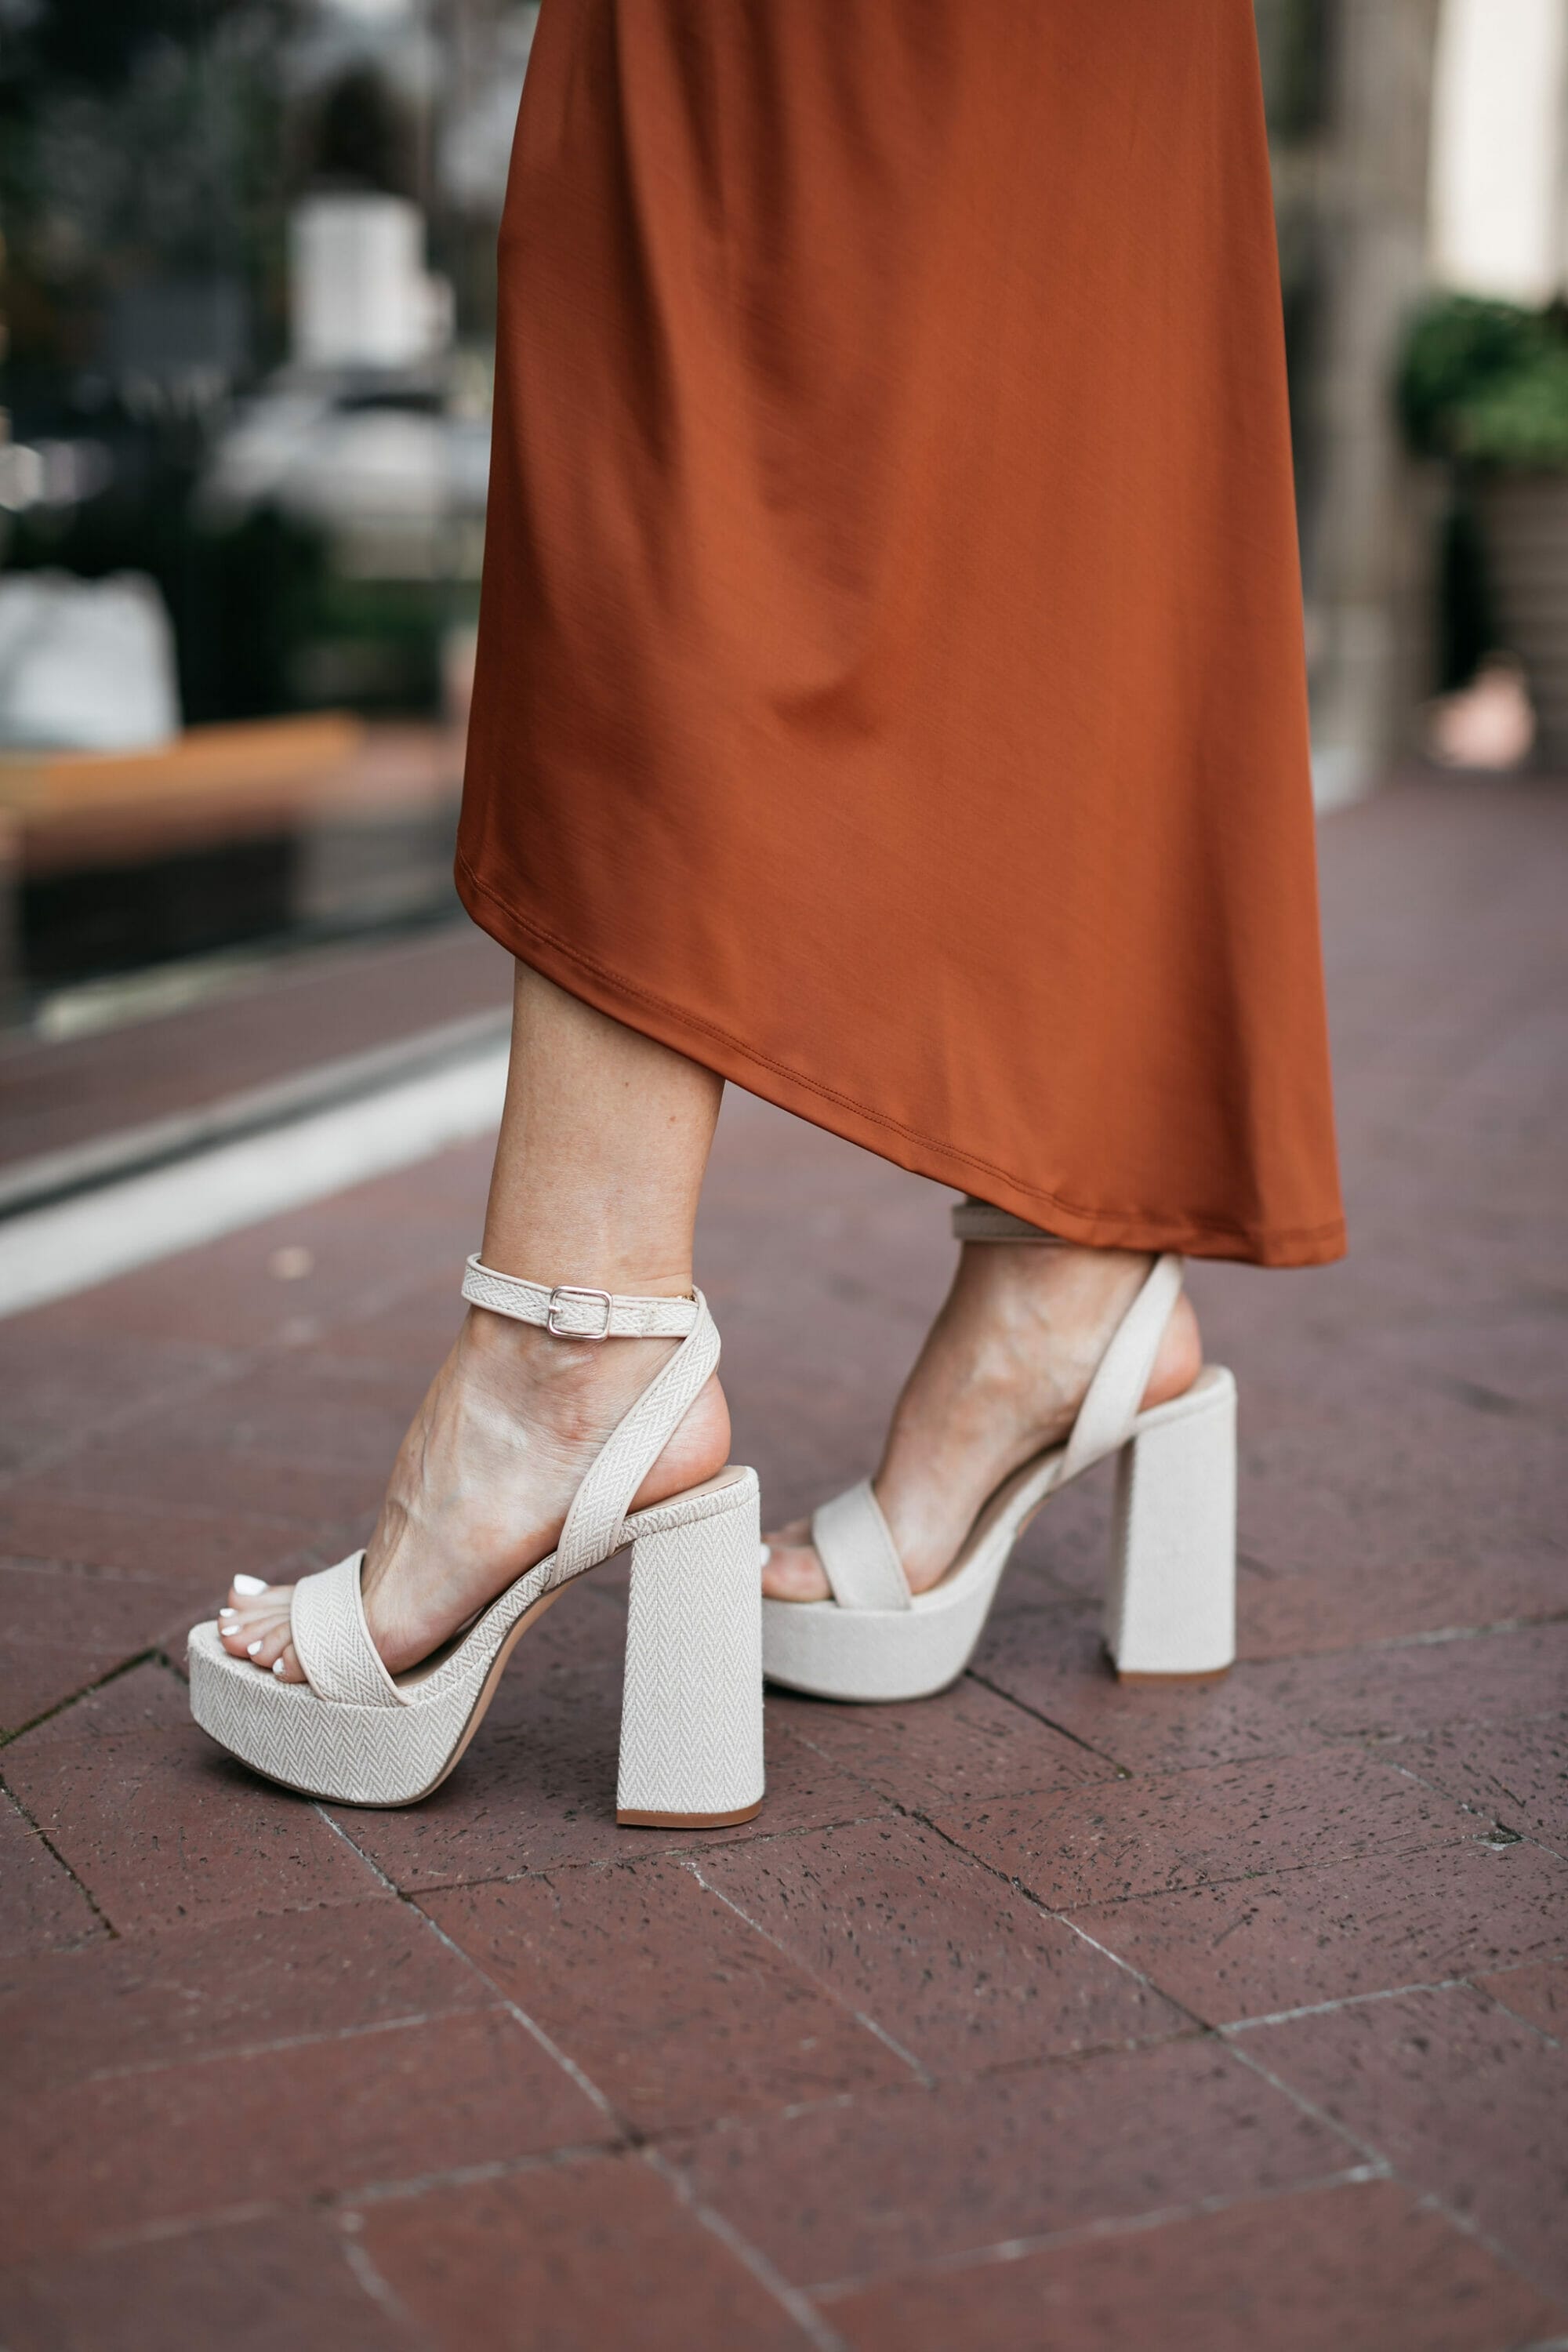 Under $30 platforms that will make you appear slimmer in a dress.